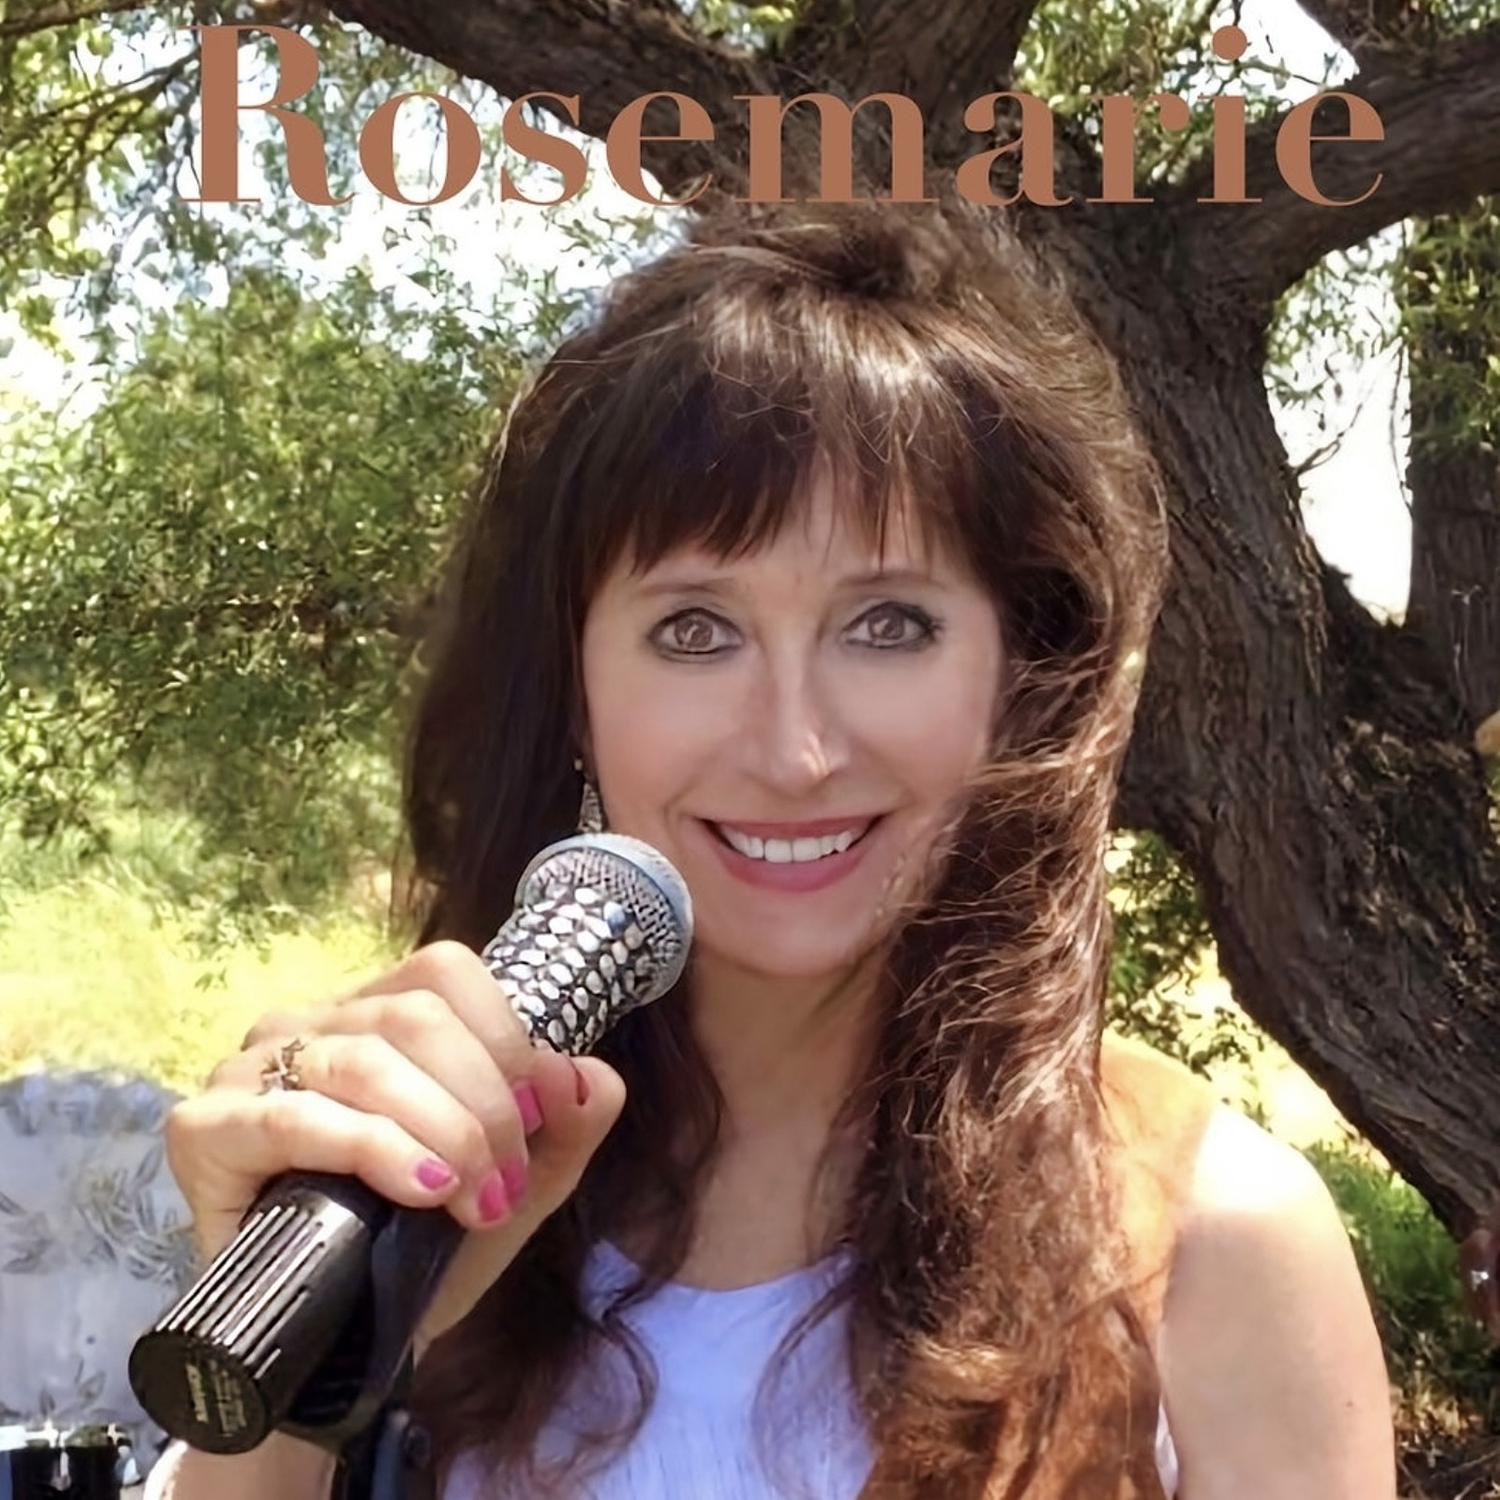 Rosemarie - Love While I Can